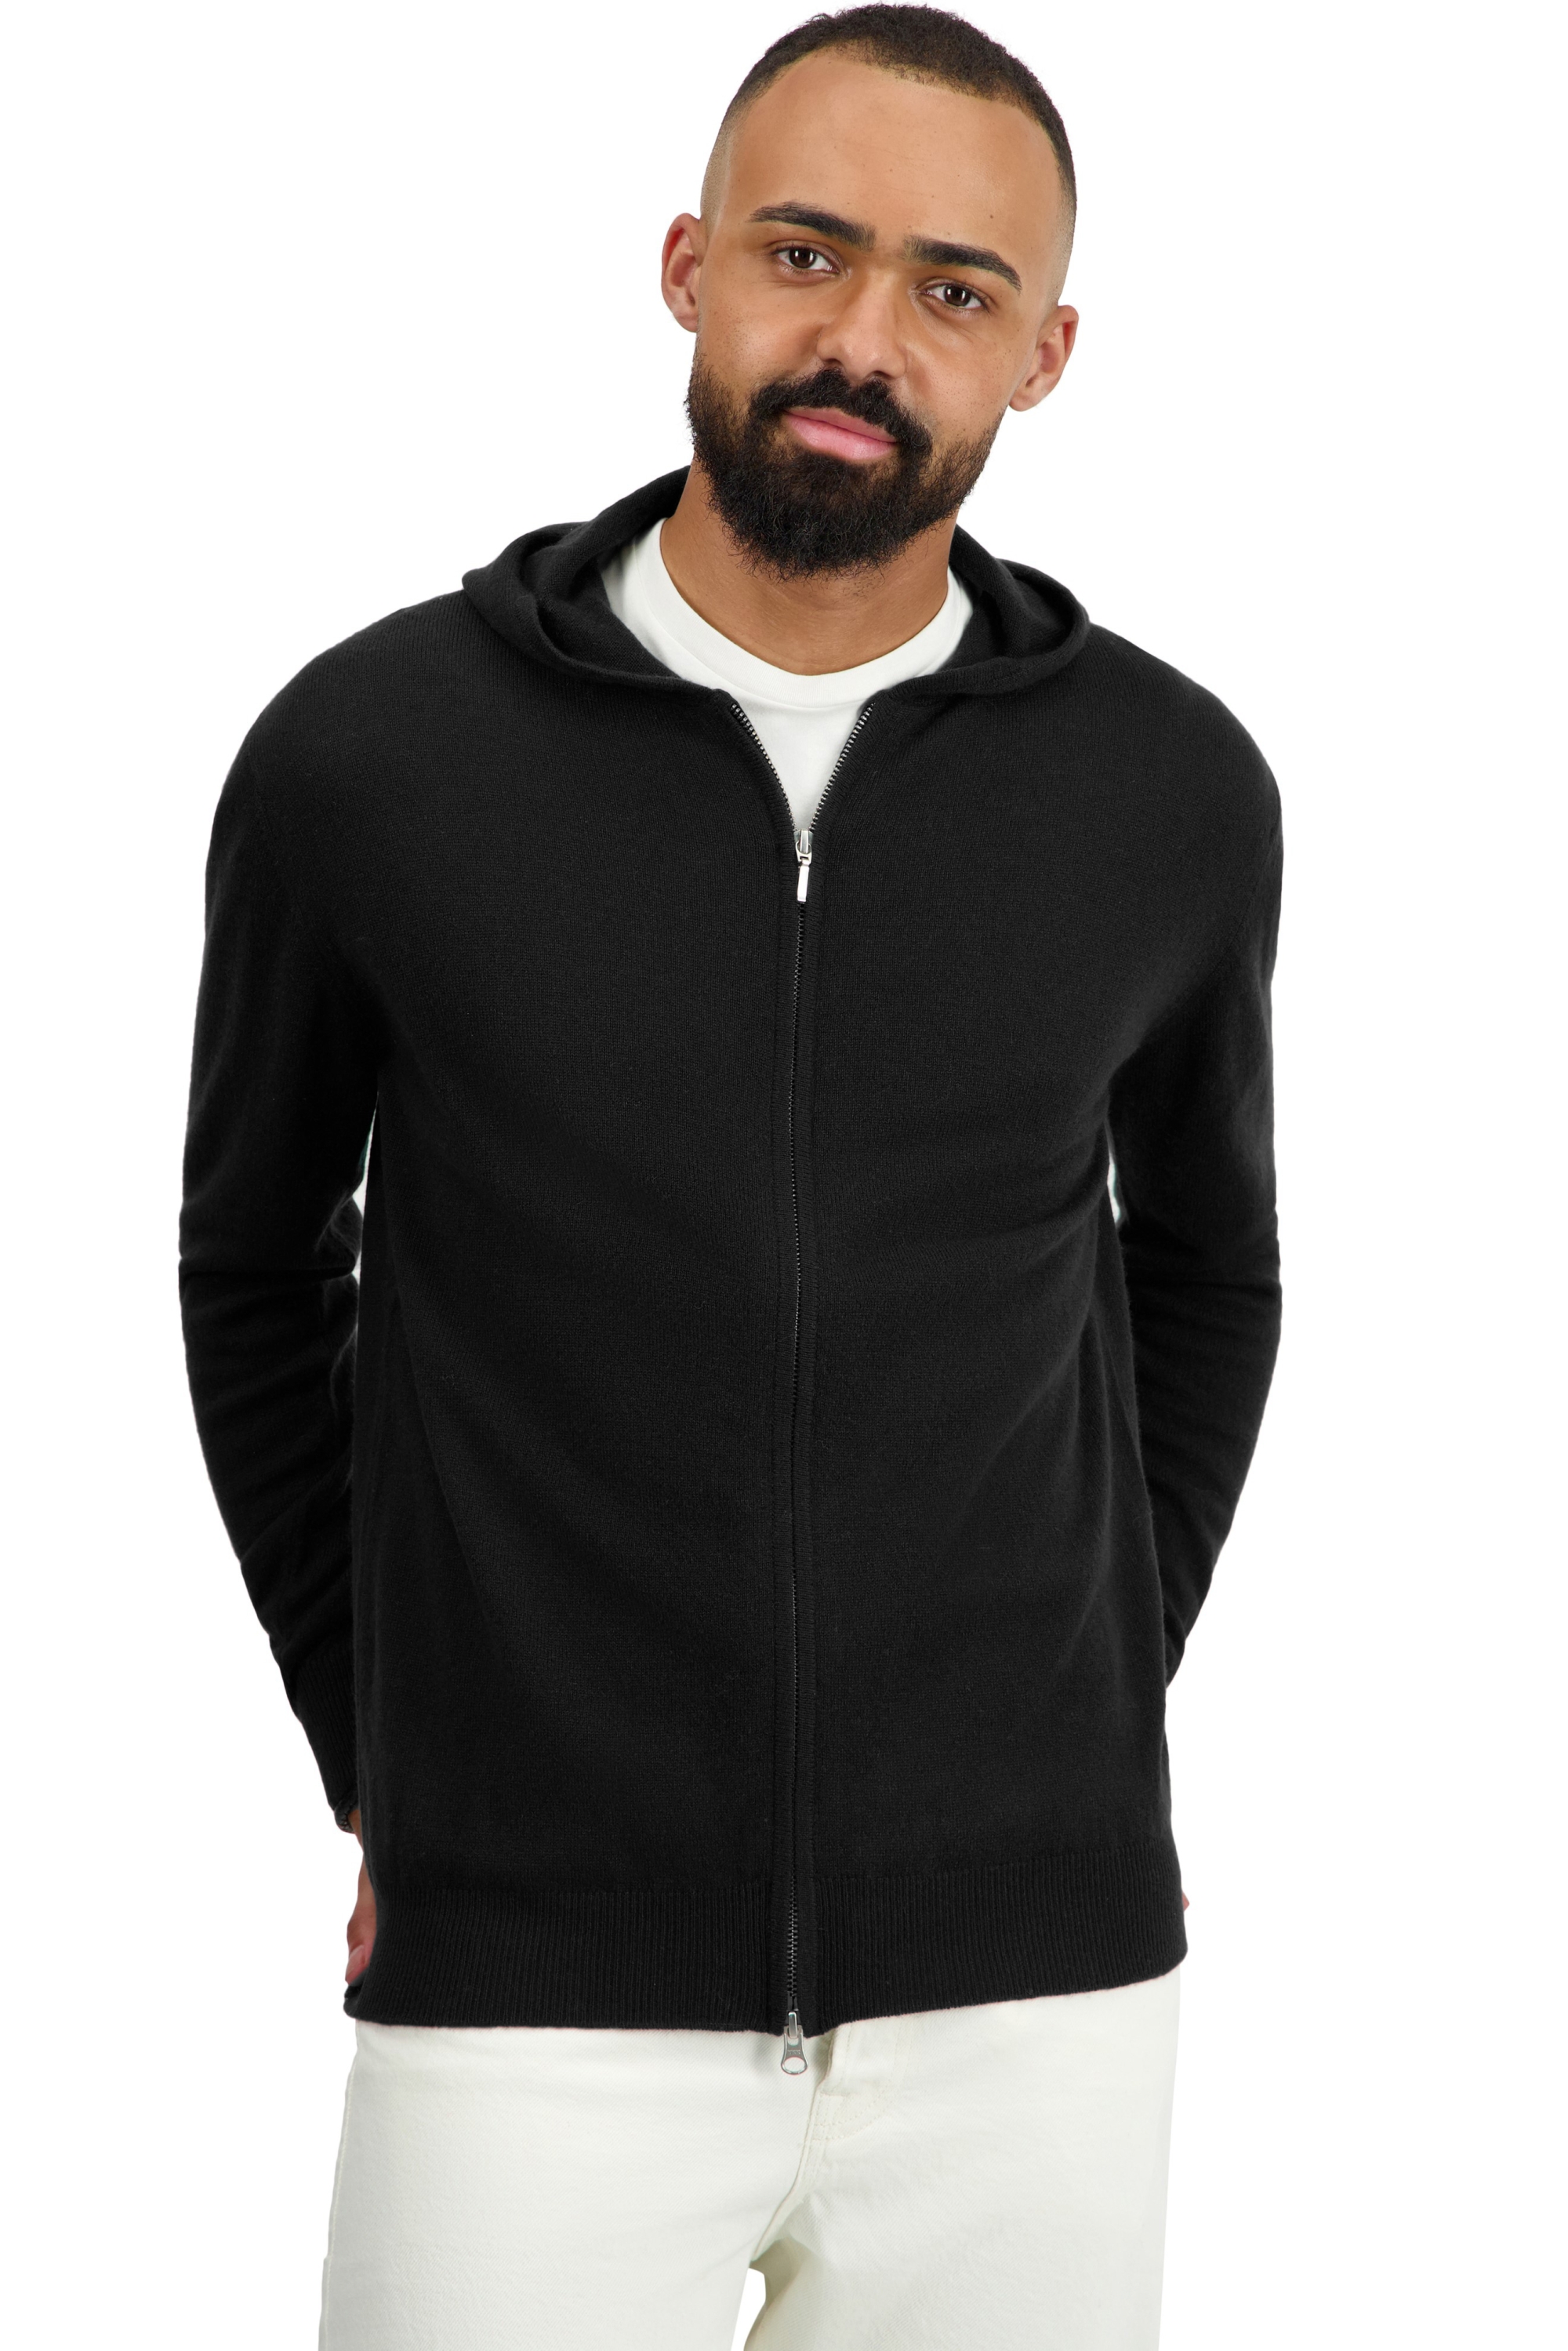 Cashmere men basic sweaters at low prices taboo first black l